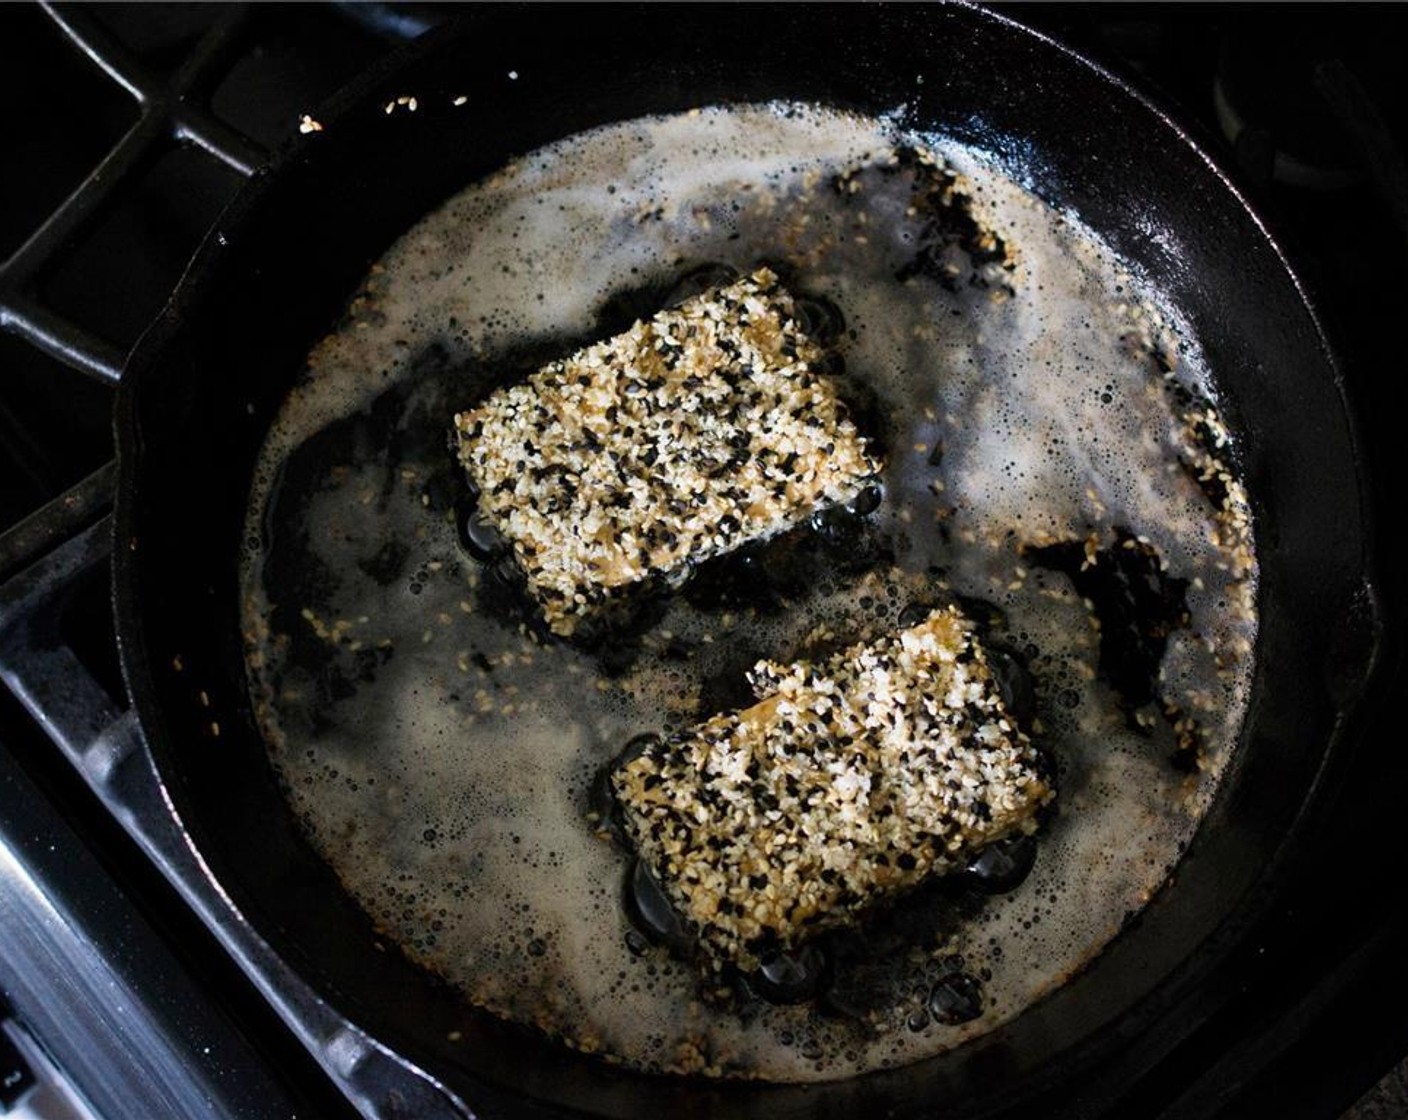 step 9 Over medium-high heat, add enough Vegetable Oil (as needed) to cover the bottom of a heavy-bottomed skillet. Once hot, add the tofu slices in batches. Cook 2-3 minutes (or until golden-brown) on the first side.